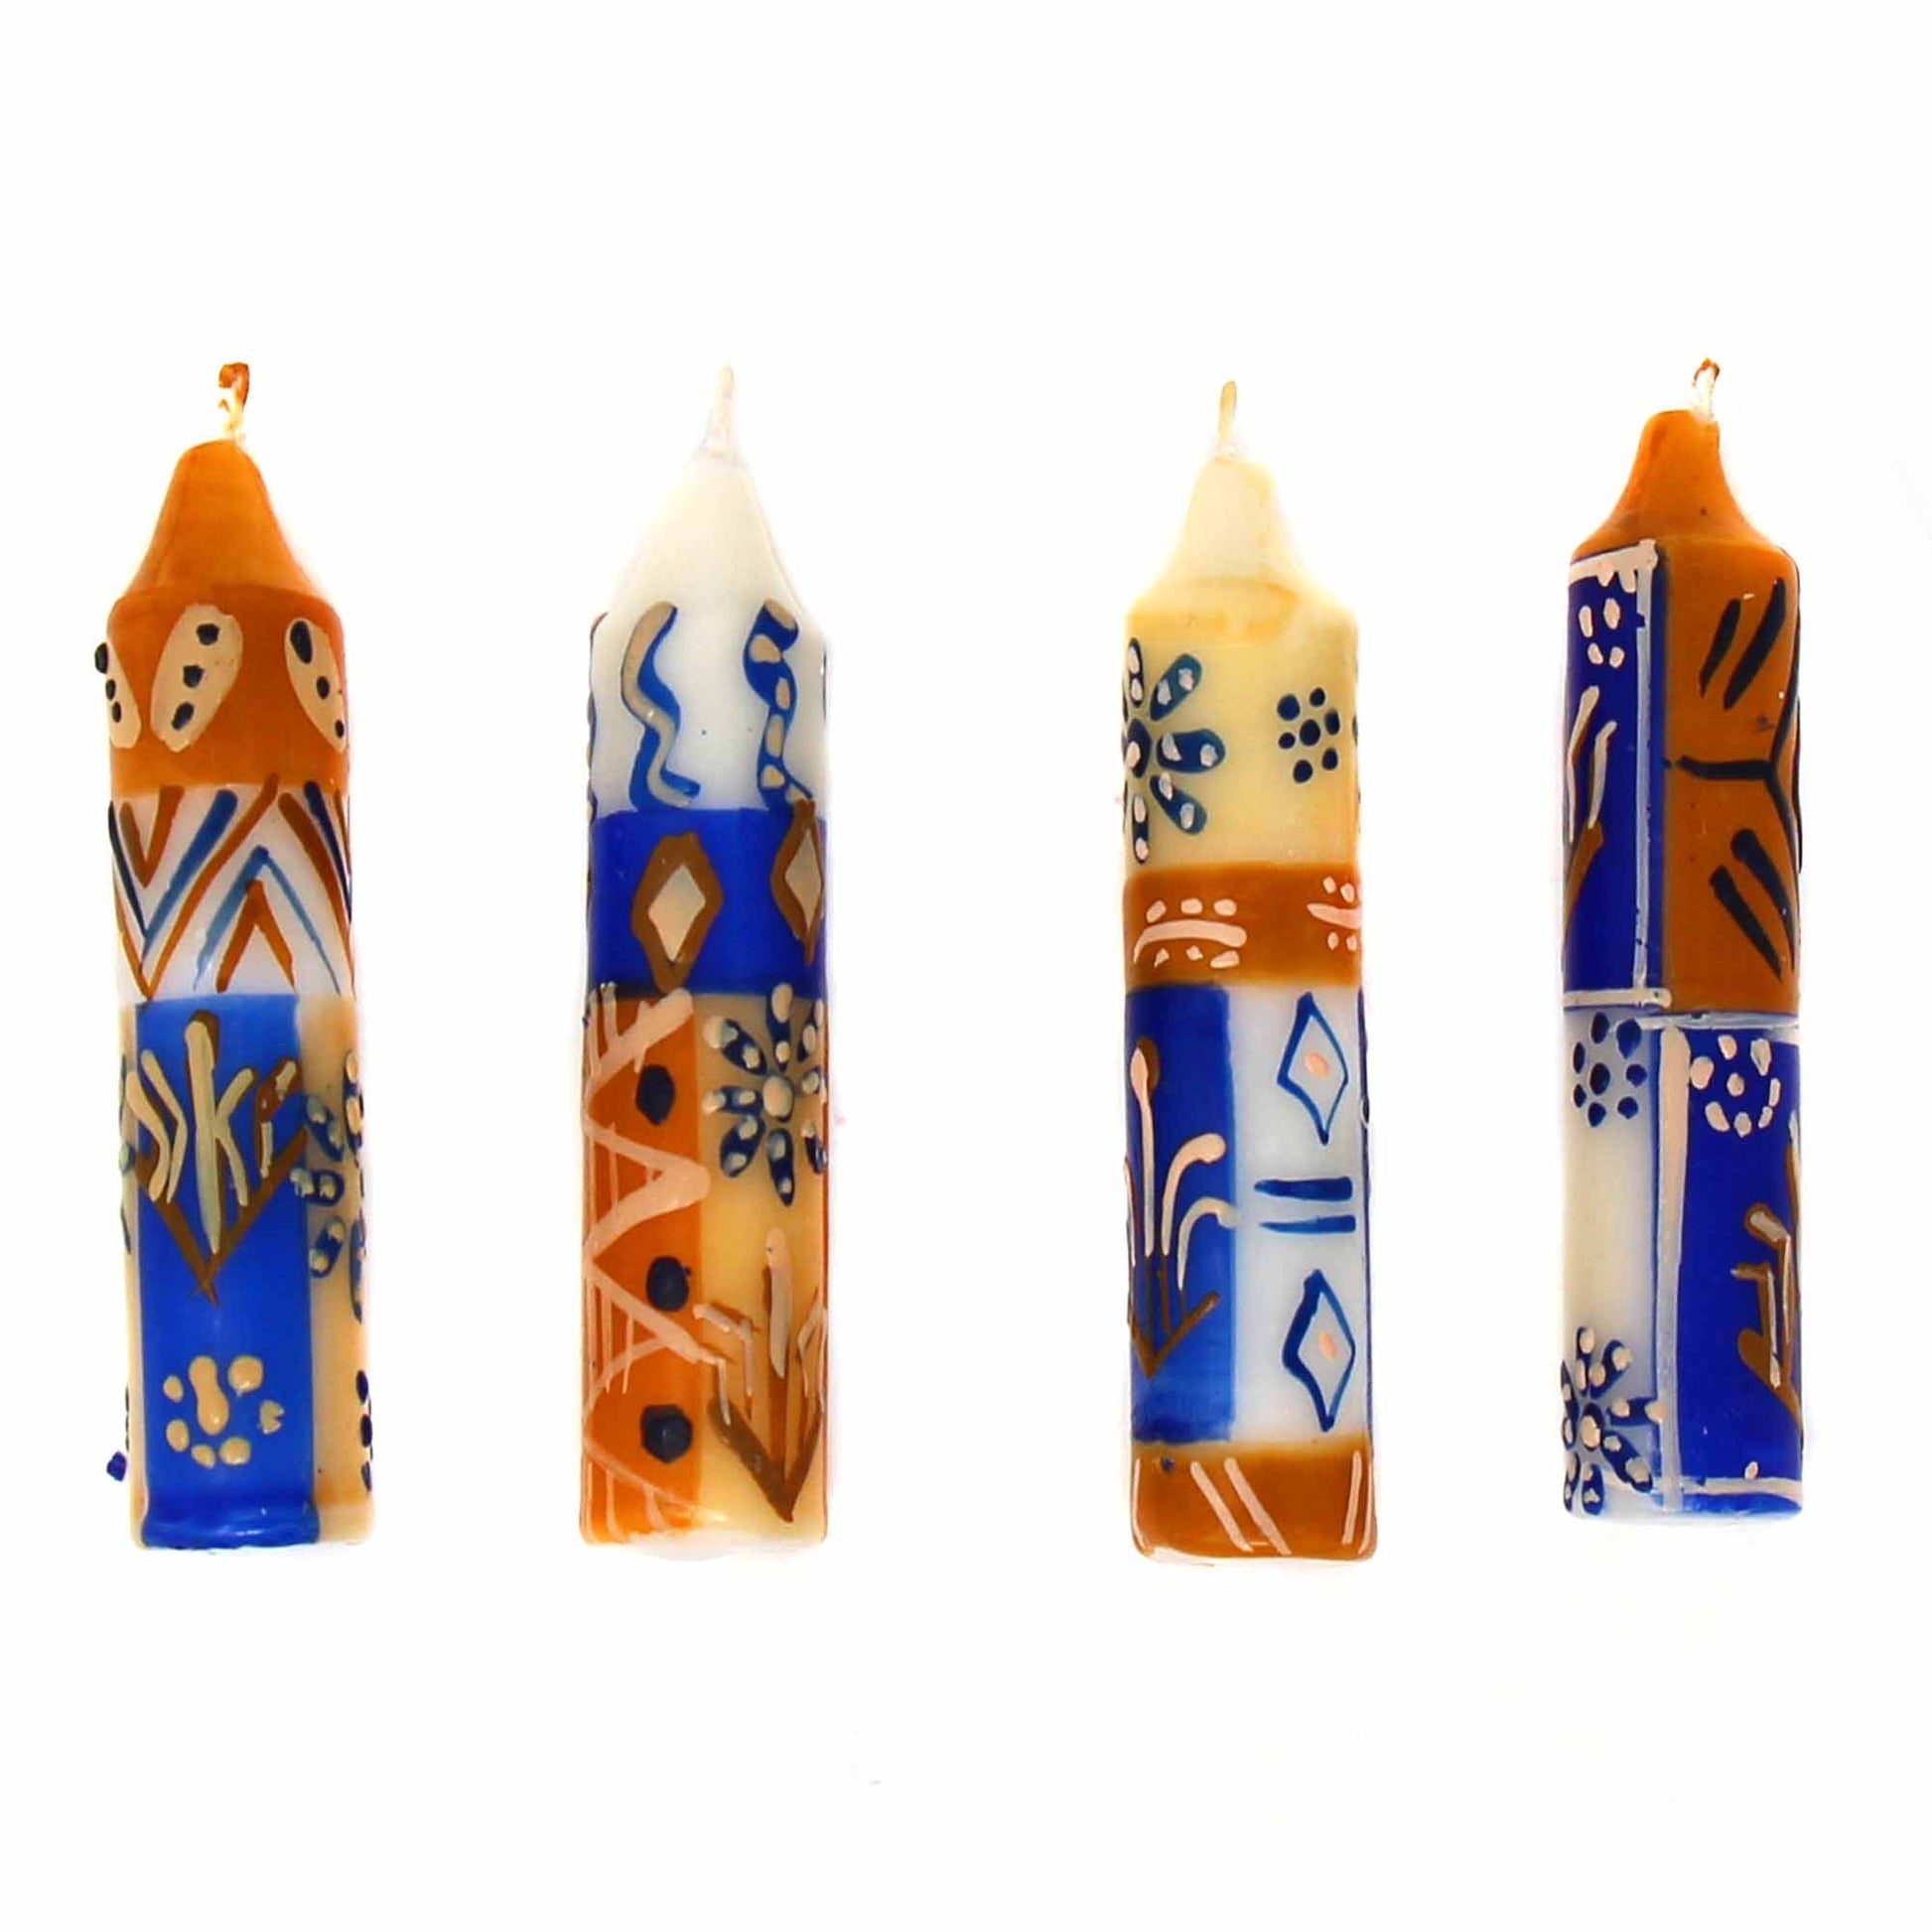 Hand-Painted 4" Dinner or Shabbat Candles, Set of 4  (Durra Design) - Linda Kay Gifford’s - Those Nasty Women TALK! by SWEETSurvivor